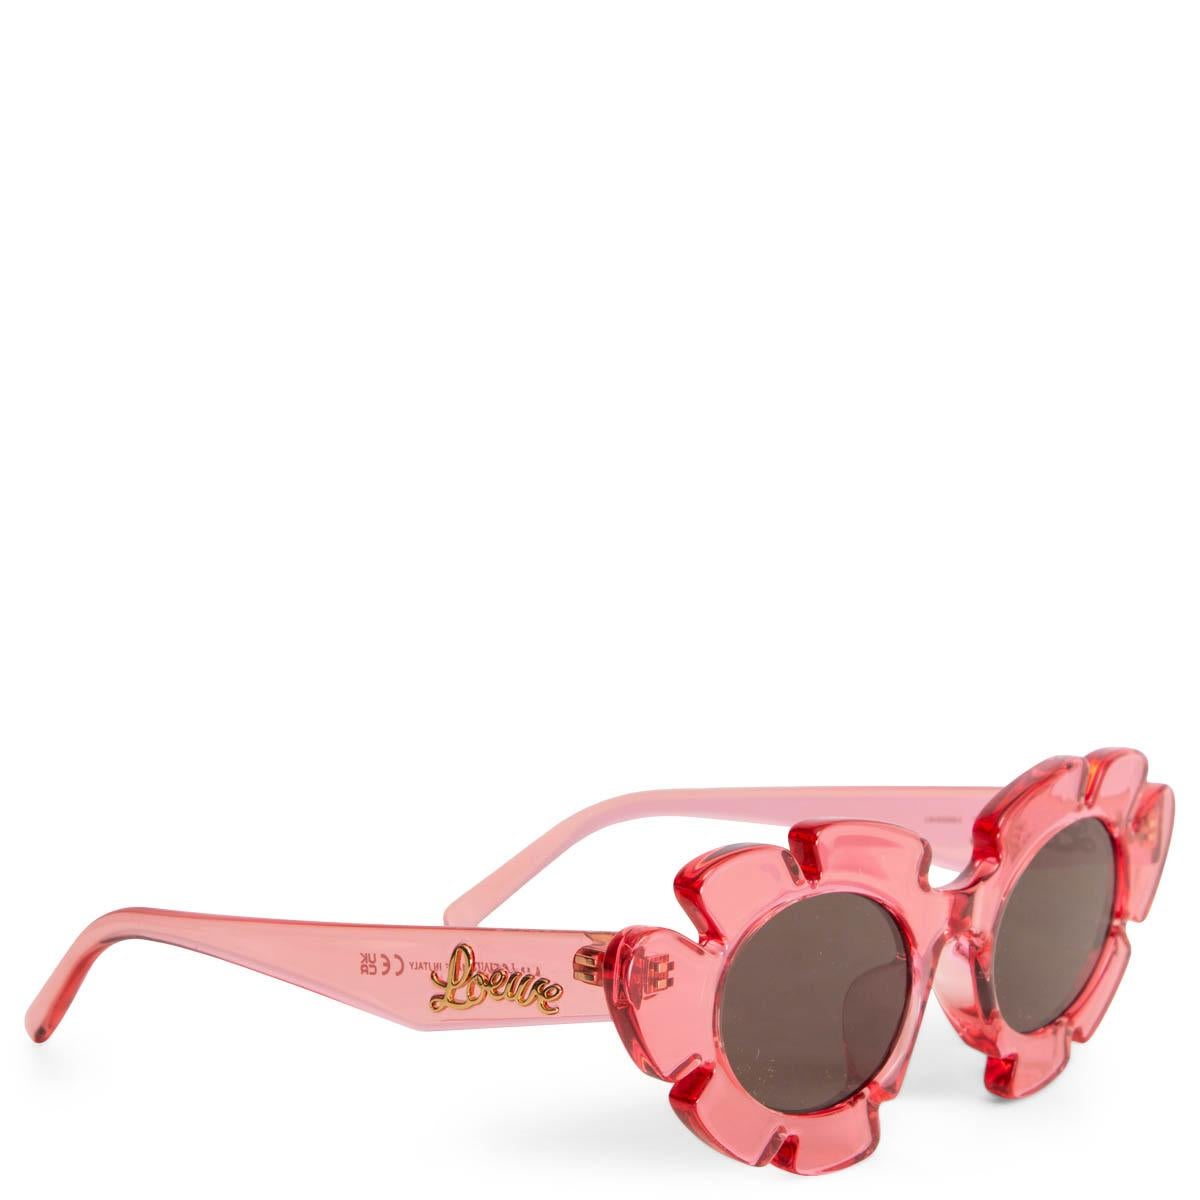 100% authentic Loewe x Paula Ibiza LW40088U flower shaped sunglasses in pink acetate and grey lenses. Have been worn and are in excellent condition. 

Measurements
Model	LW40088U 72E 47-20 140
Width	15cm (5.9in)
Height	5cm (2in)

All our listings